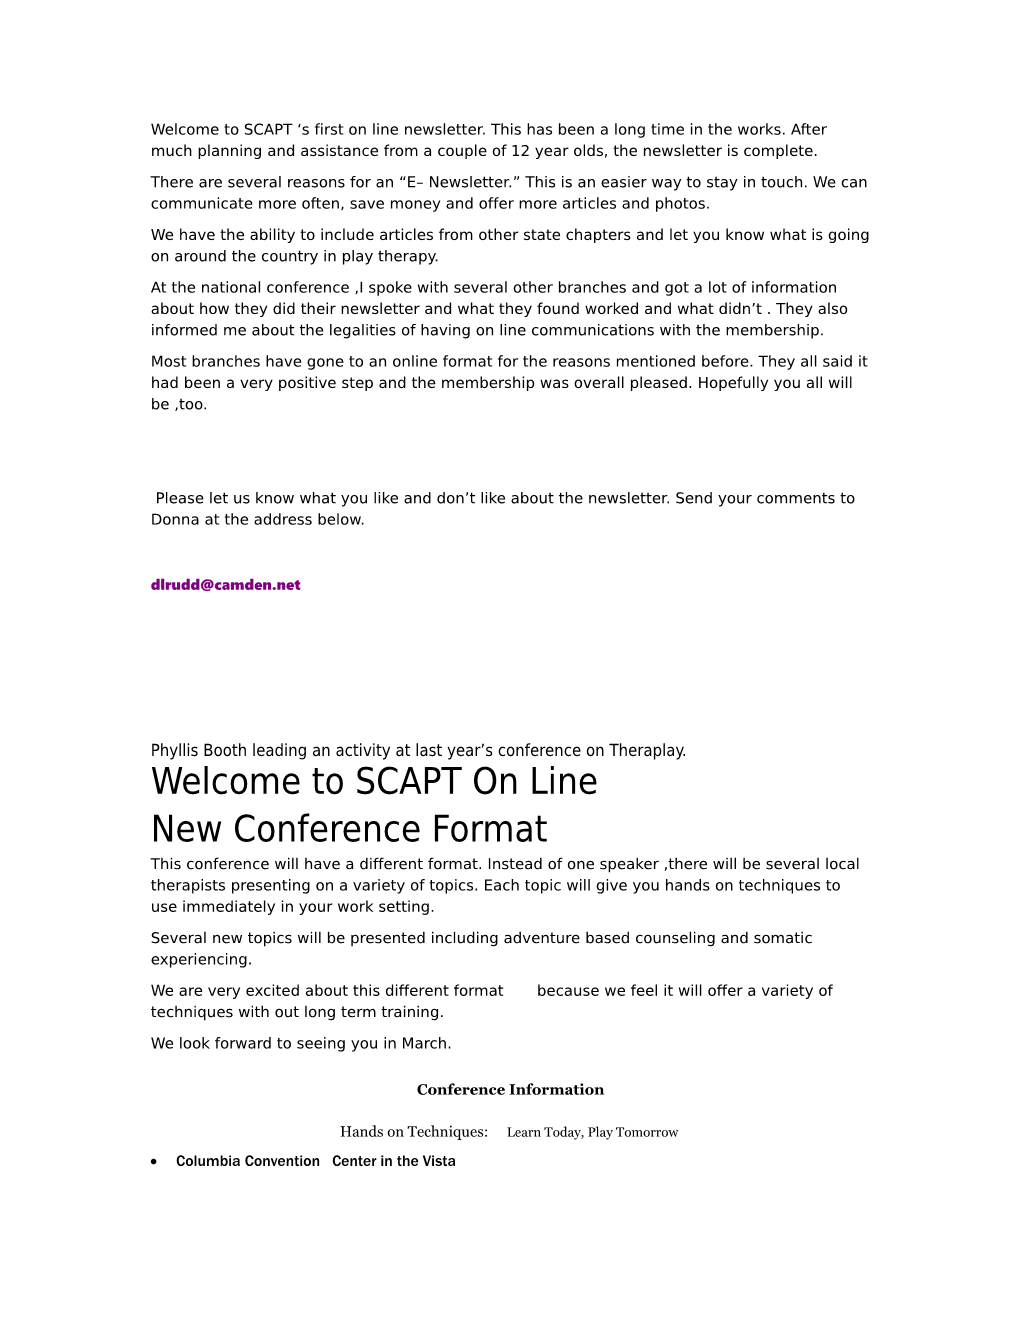 Welcome to SCAPT S First on Line Newsletter. This Has Been a Long Time in the Works. After